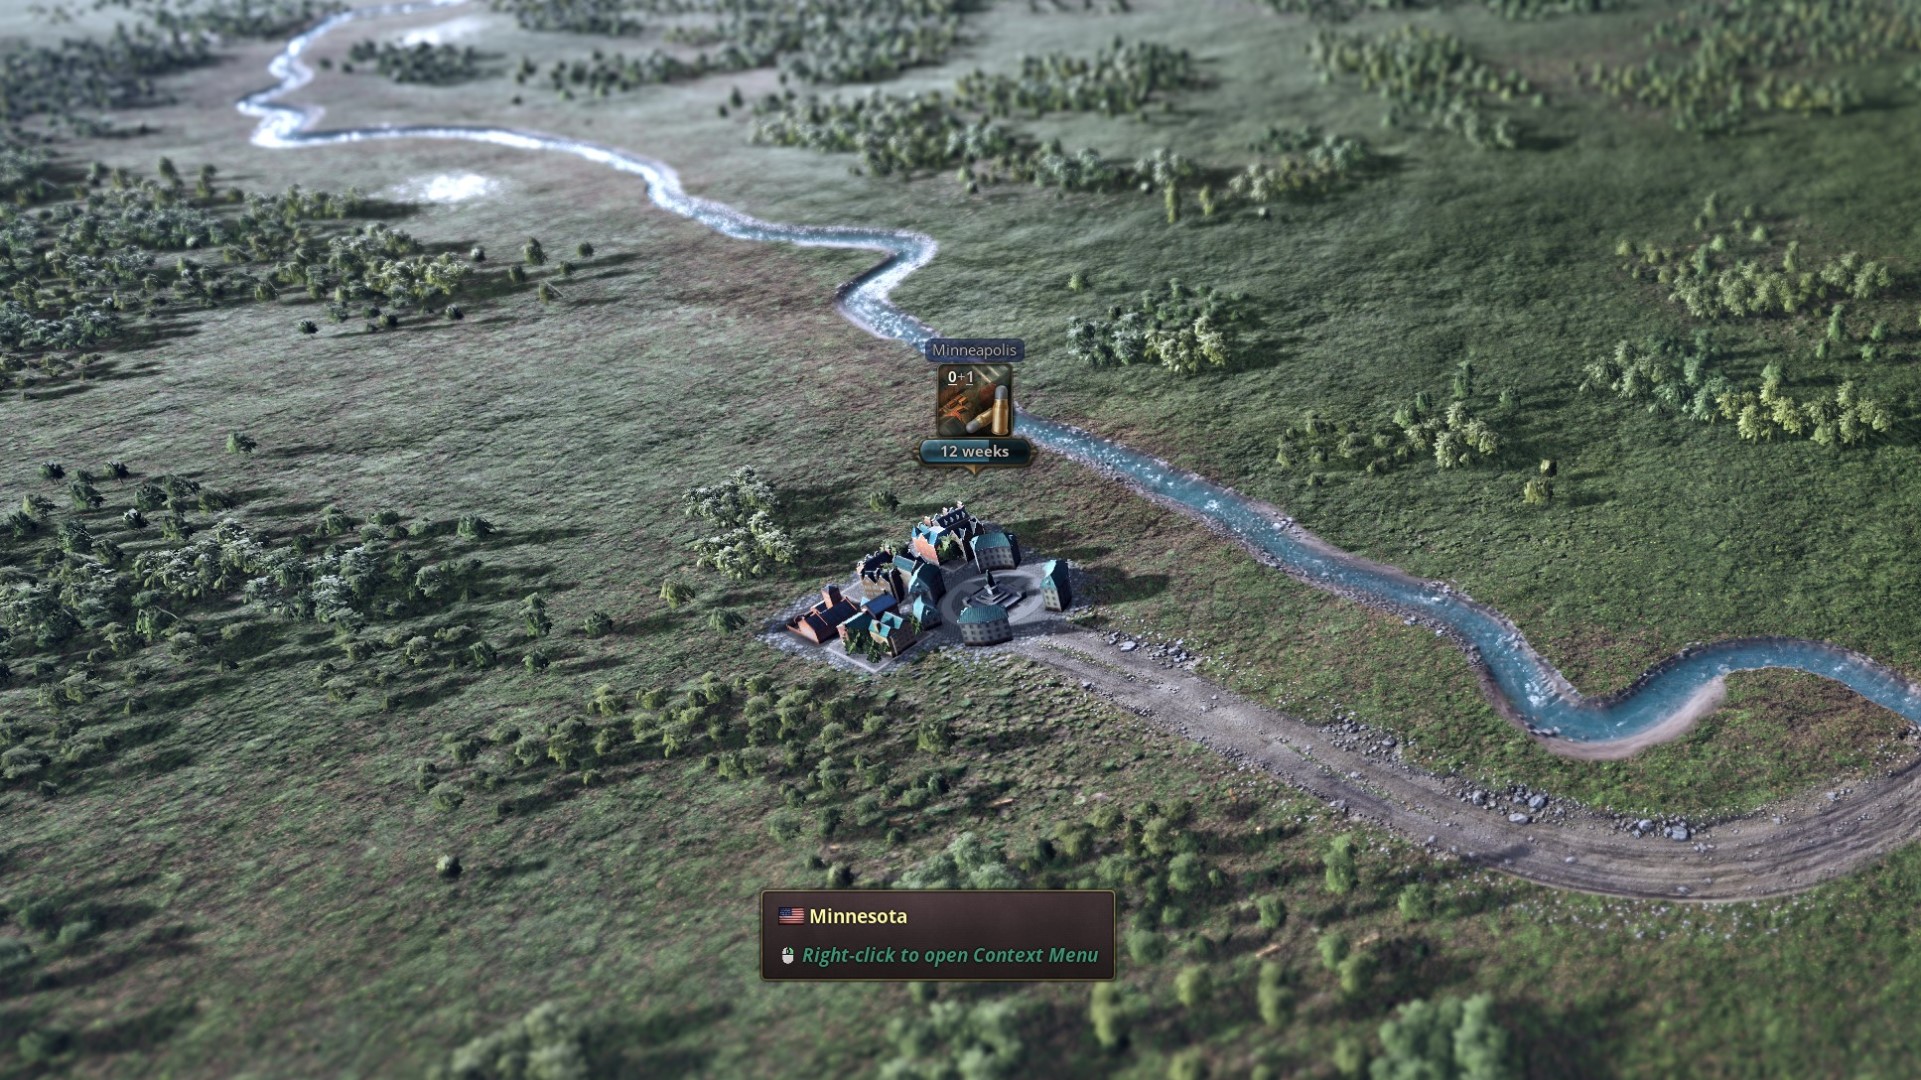 Victoria 3 construction and building guide: A munitions factory being built in Minneapolis, which is represented by a tiny town along the river